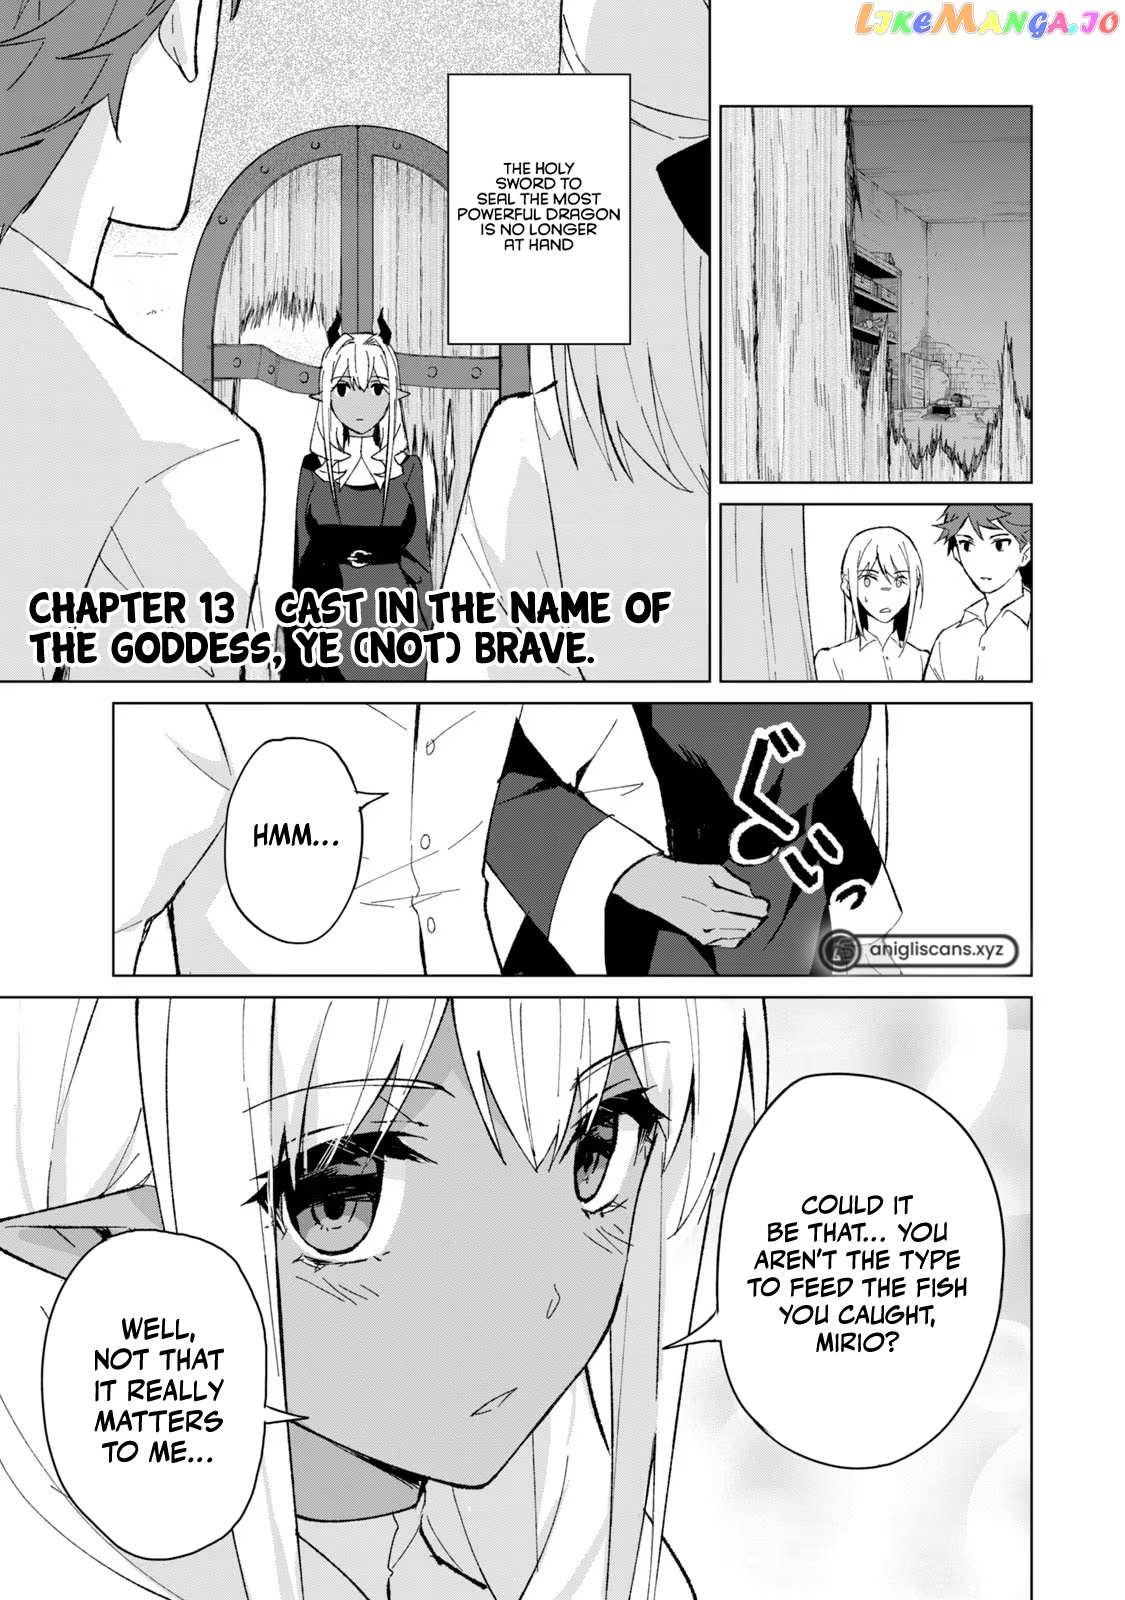 A Story About a Hero Exterminating a Dragon-Class Beautiful Girl Demon King, Who Has Very Low Self-Esteem, With Love! - chapter 13 - #3